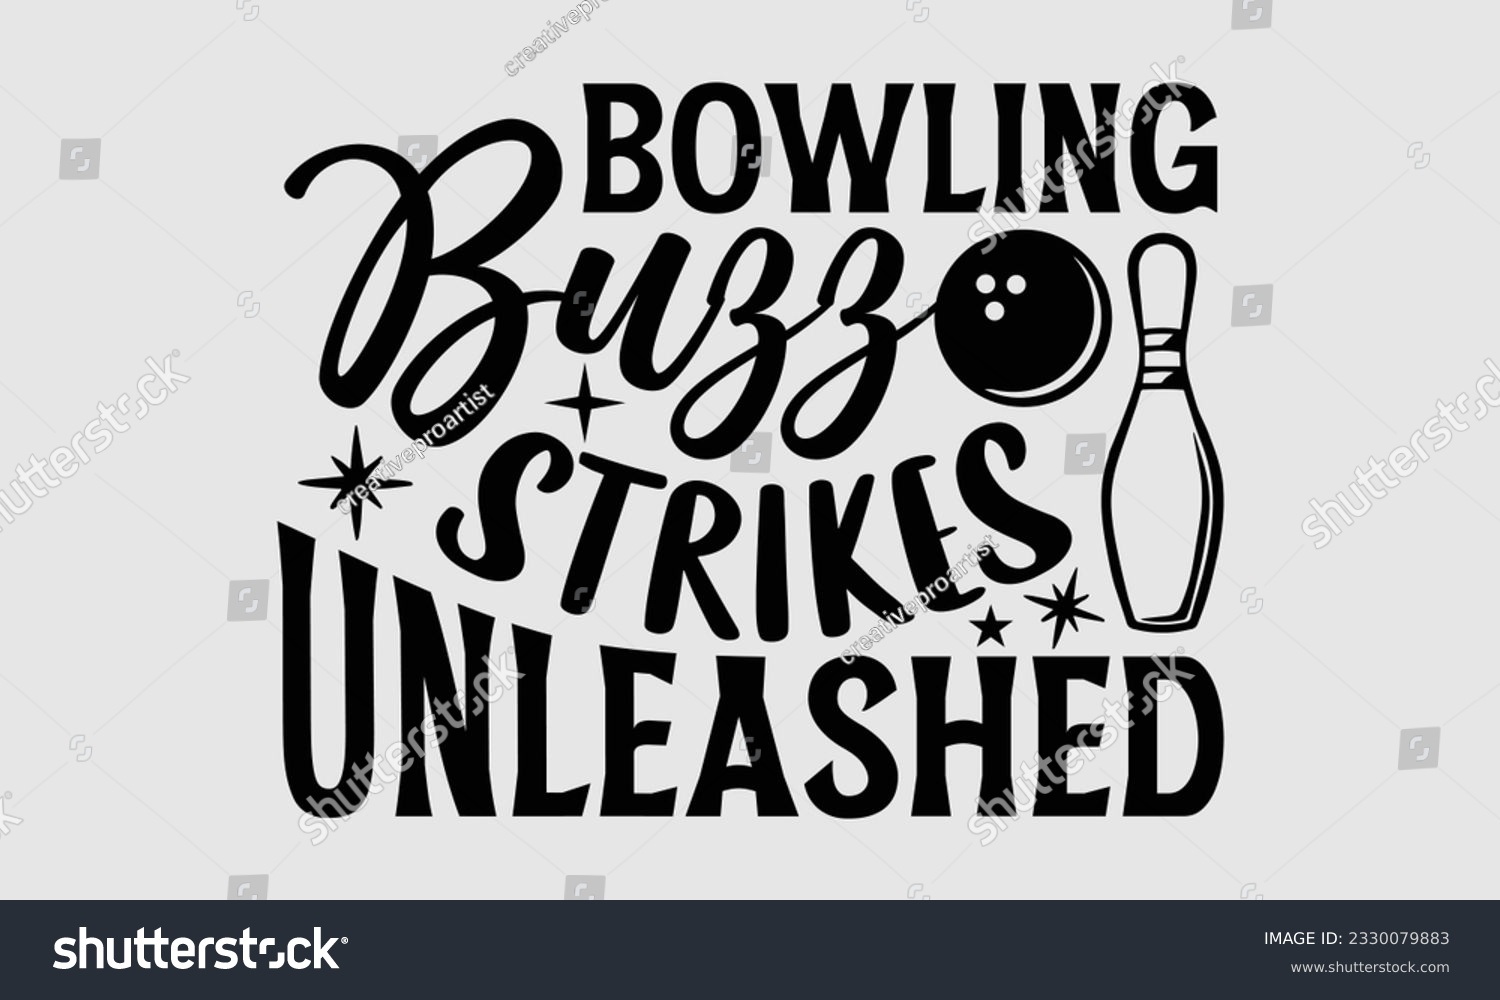 SVG of Bowling Buzz Strikes Unleashed- Bowling t-shirt design, Handmade calligraphy vector Illustration for prints on SVG and bags, posters, greeting card template EPS svg